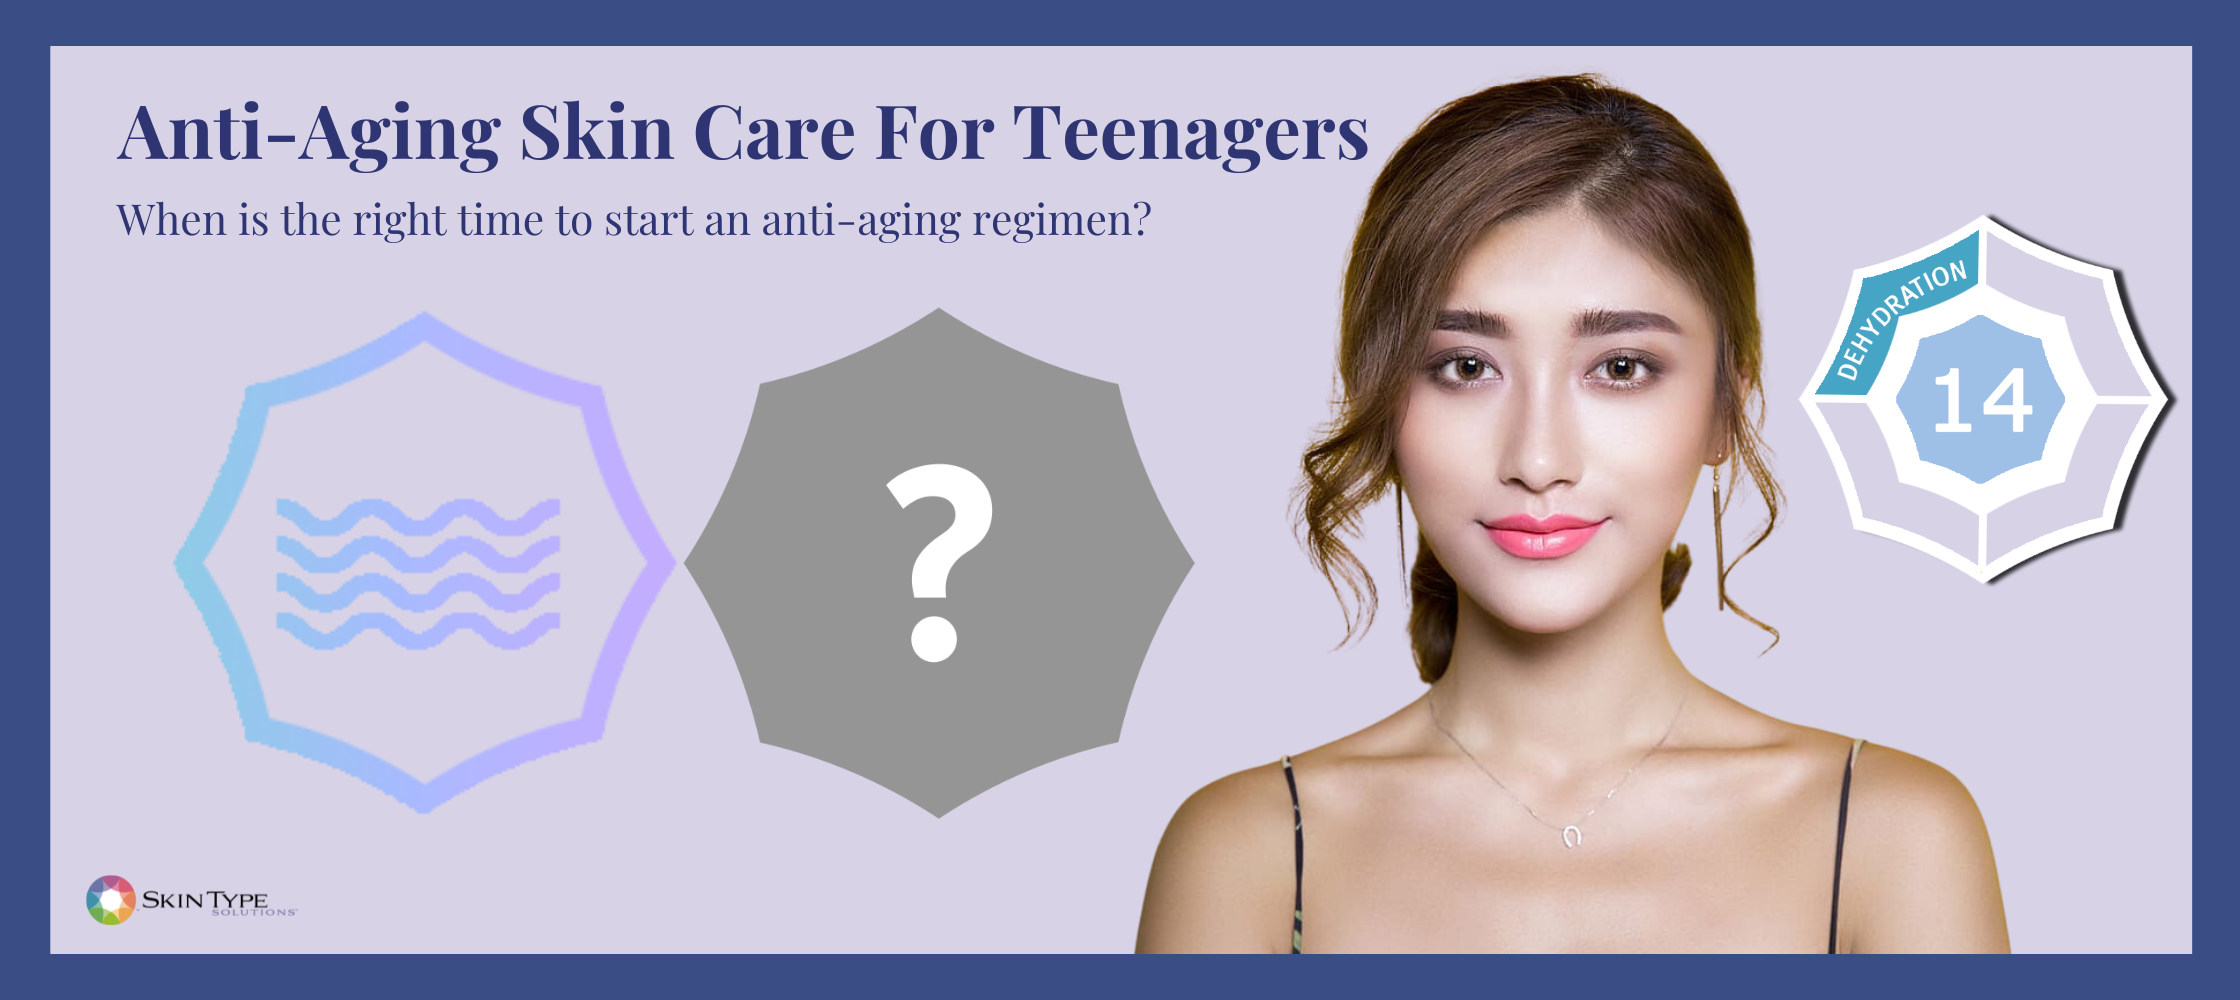 https://cdn.shopify.com/s/files/1/0740/5984/1838/t/13/assets/do-you-need-anti-aging-skin-care-in-your-teens-1691838592692.png?v=1691838593